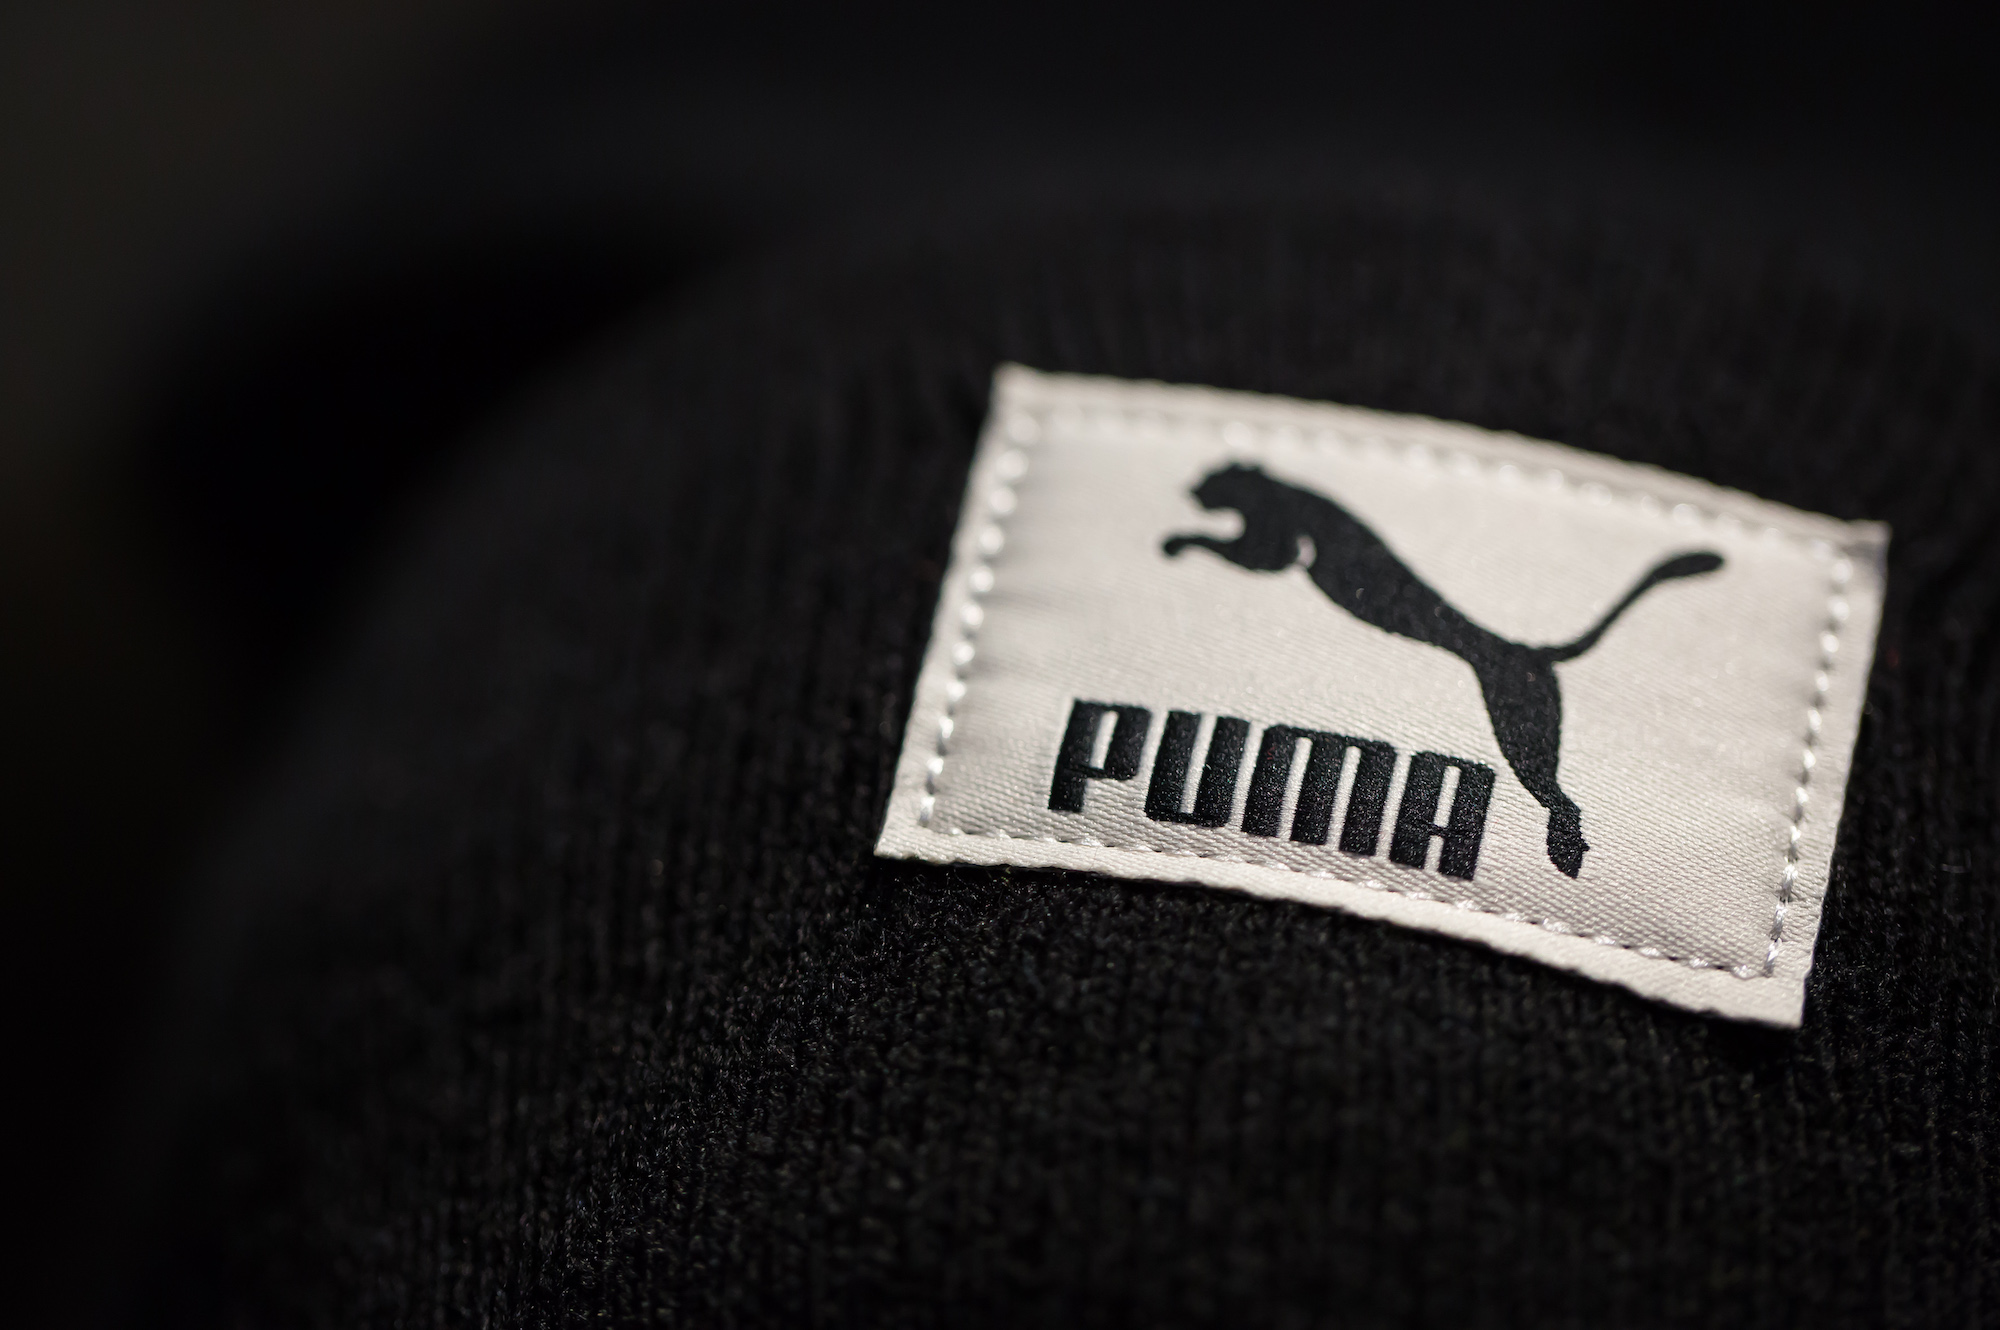 Puma shares slump as luxury group Kering plans spin-off